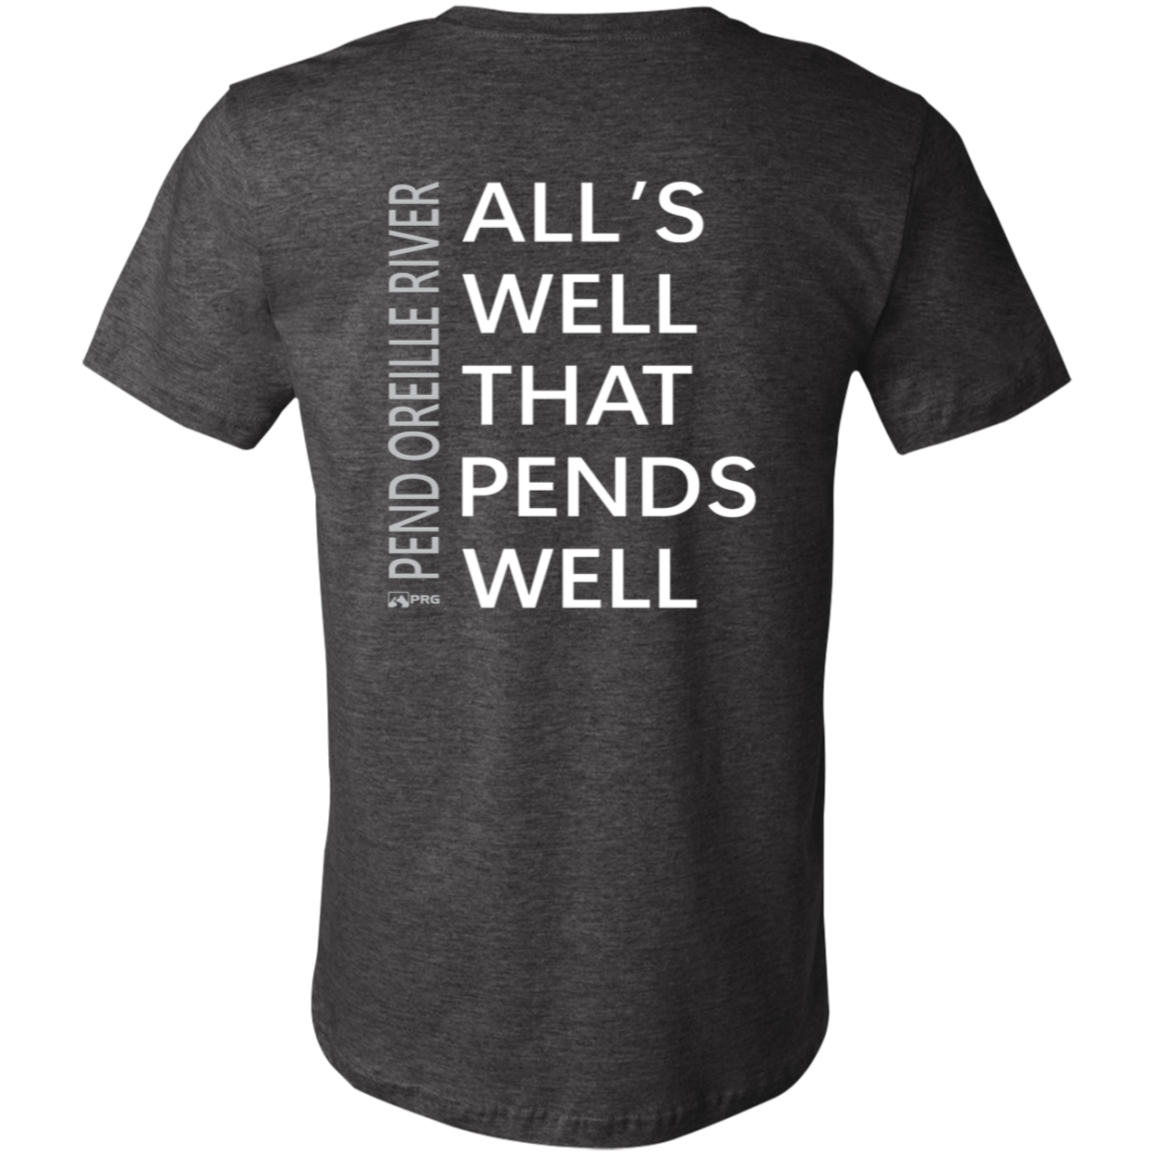 All's Well (Front & Back) - Shirt